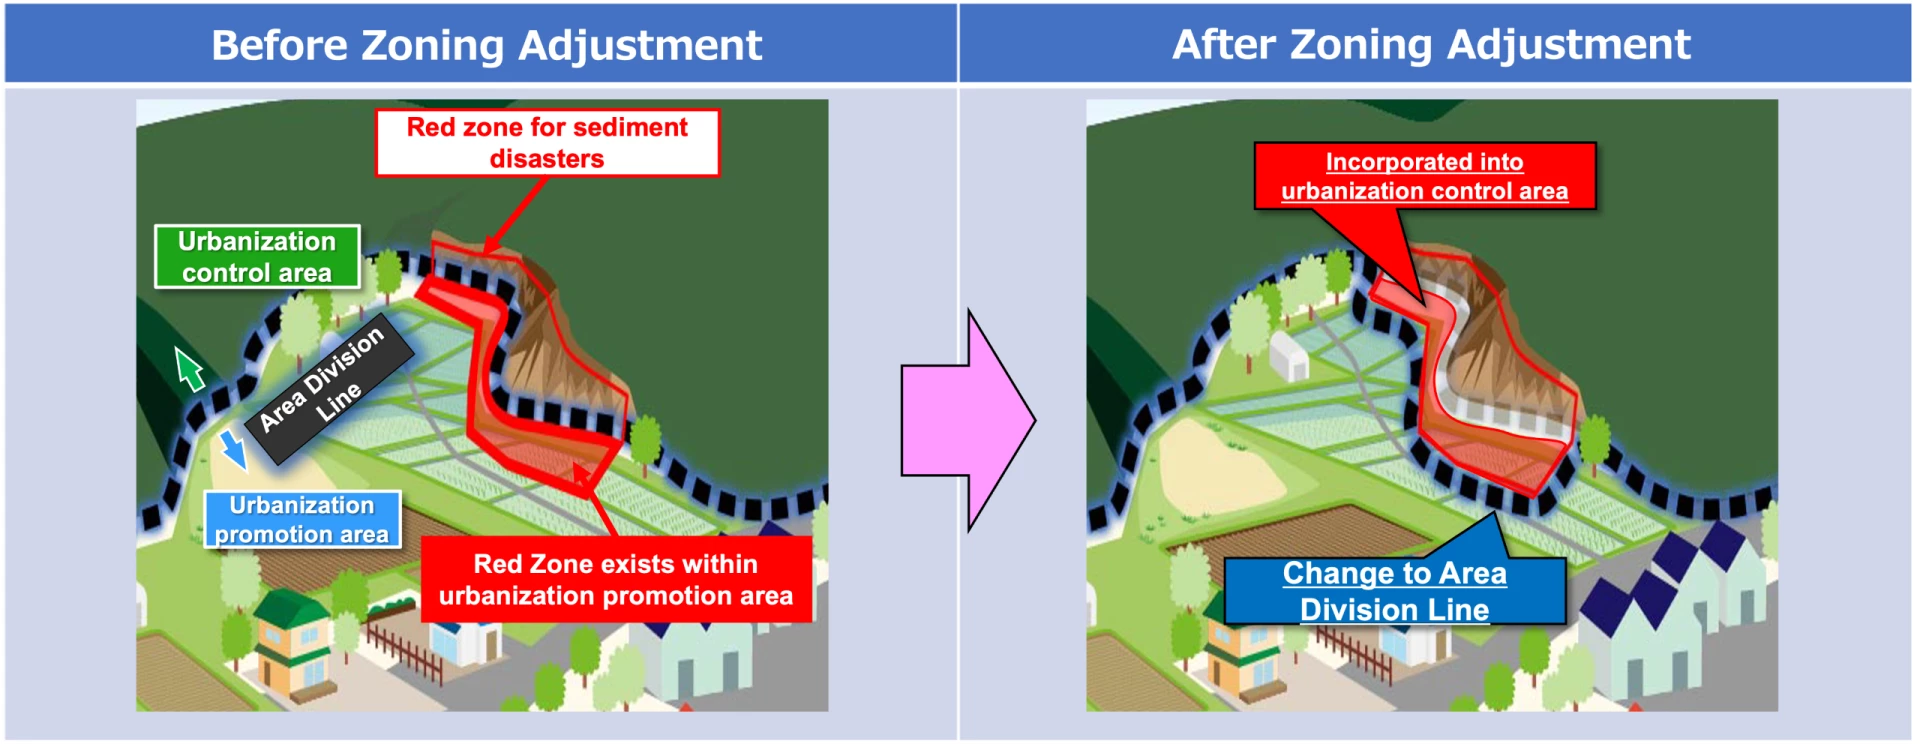 Illustration of Coordination of Zoning Between Development Control and Risk Areas